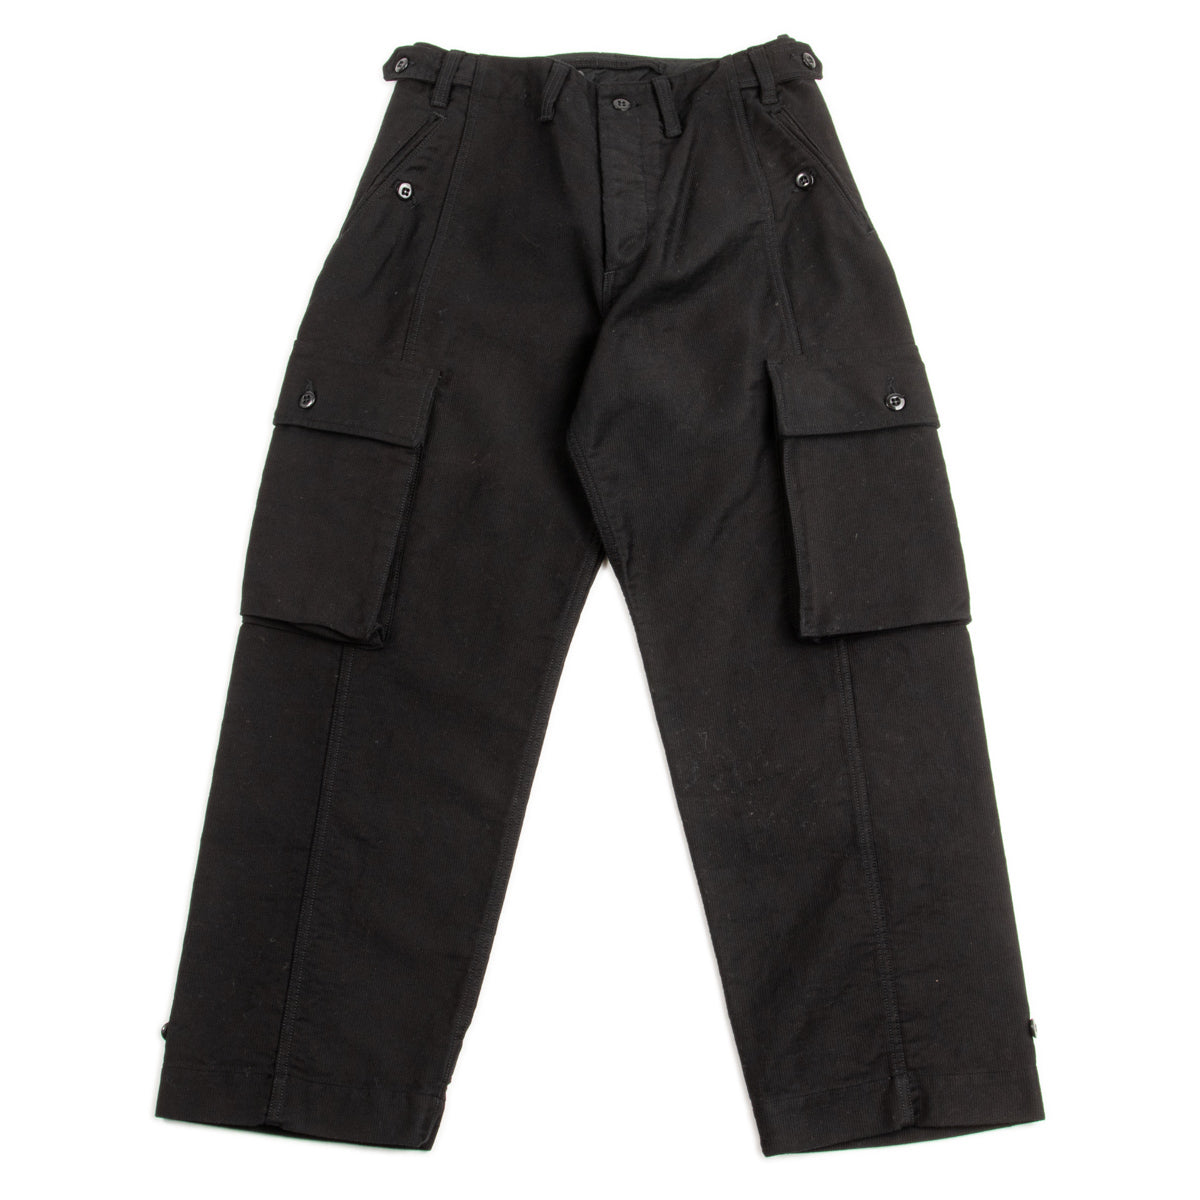 Military Cord Driving Trousers - Midnight Black